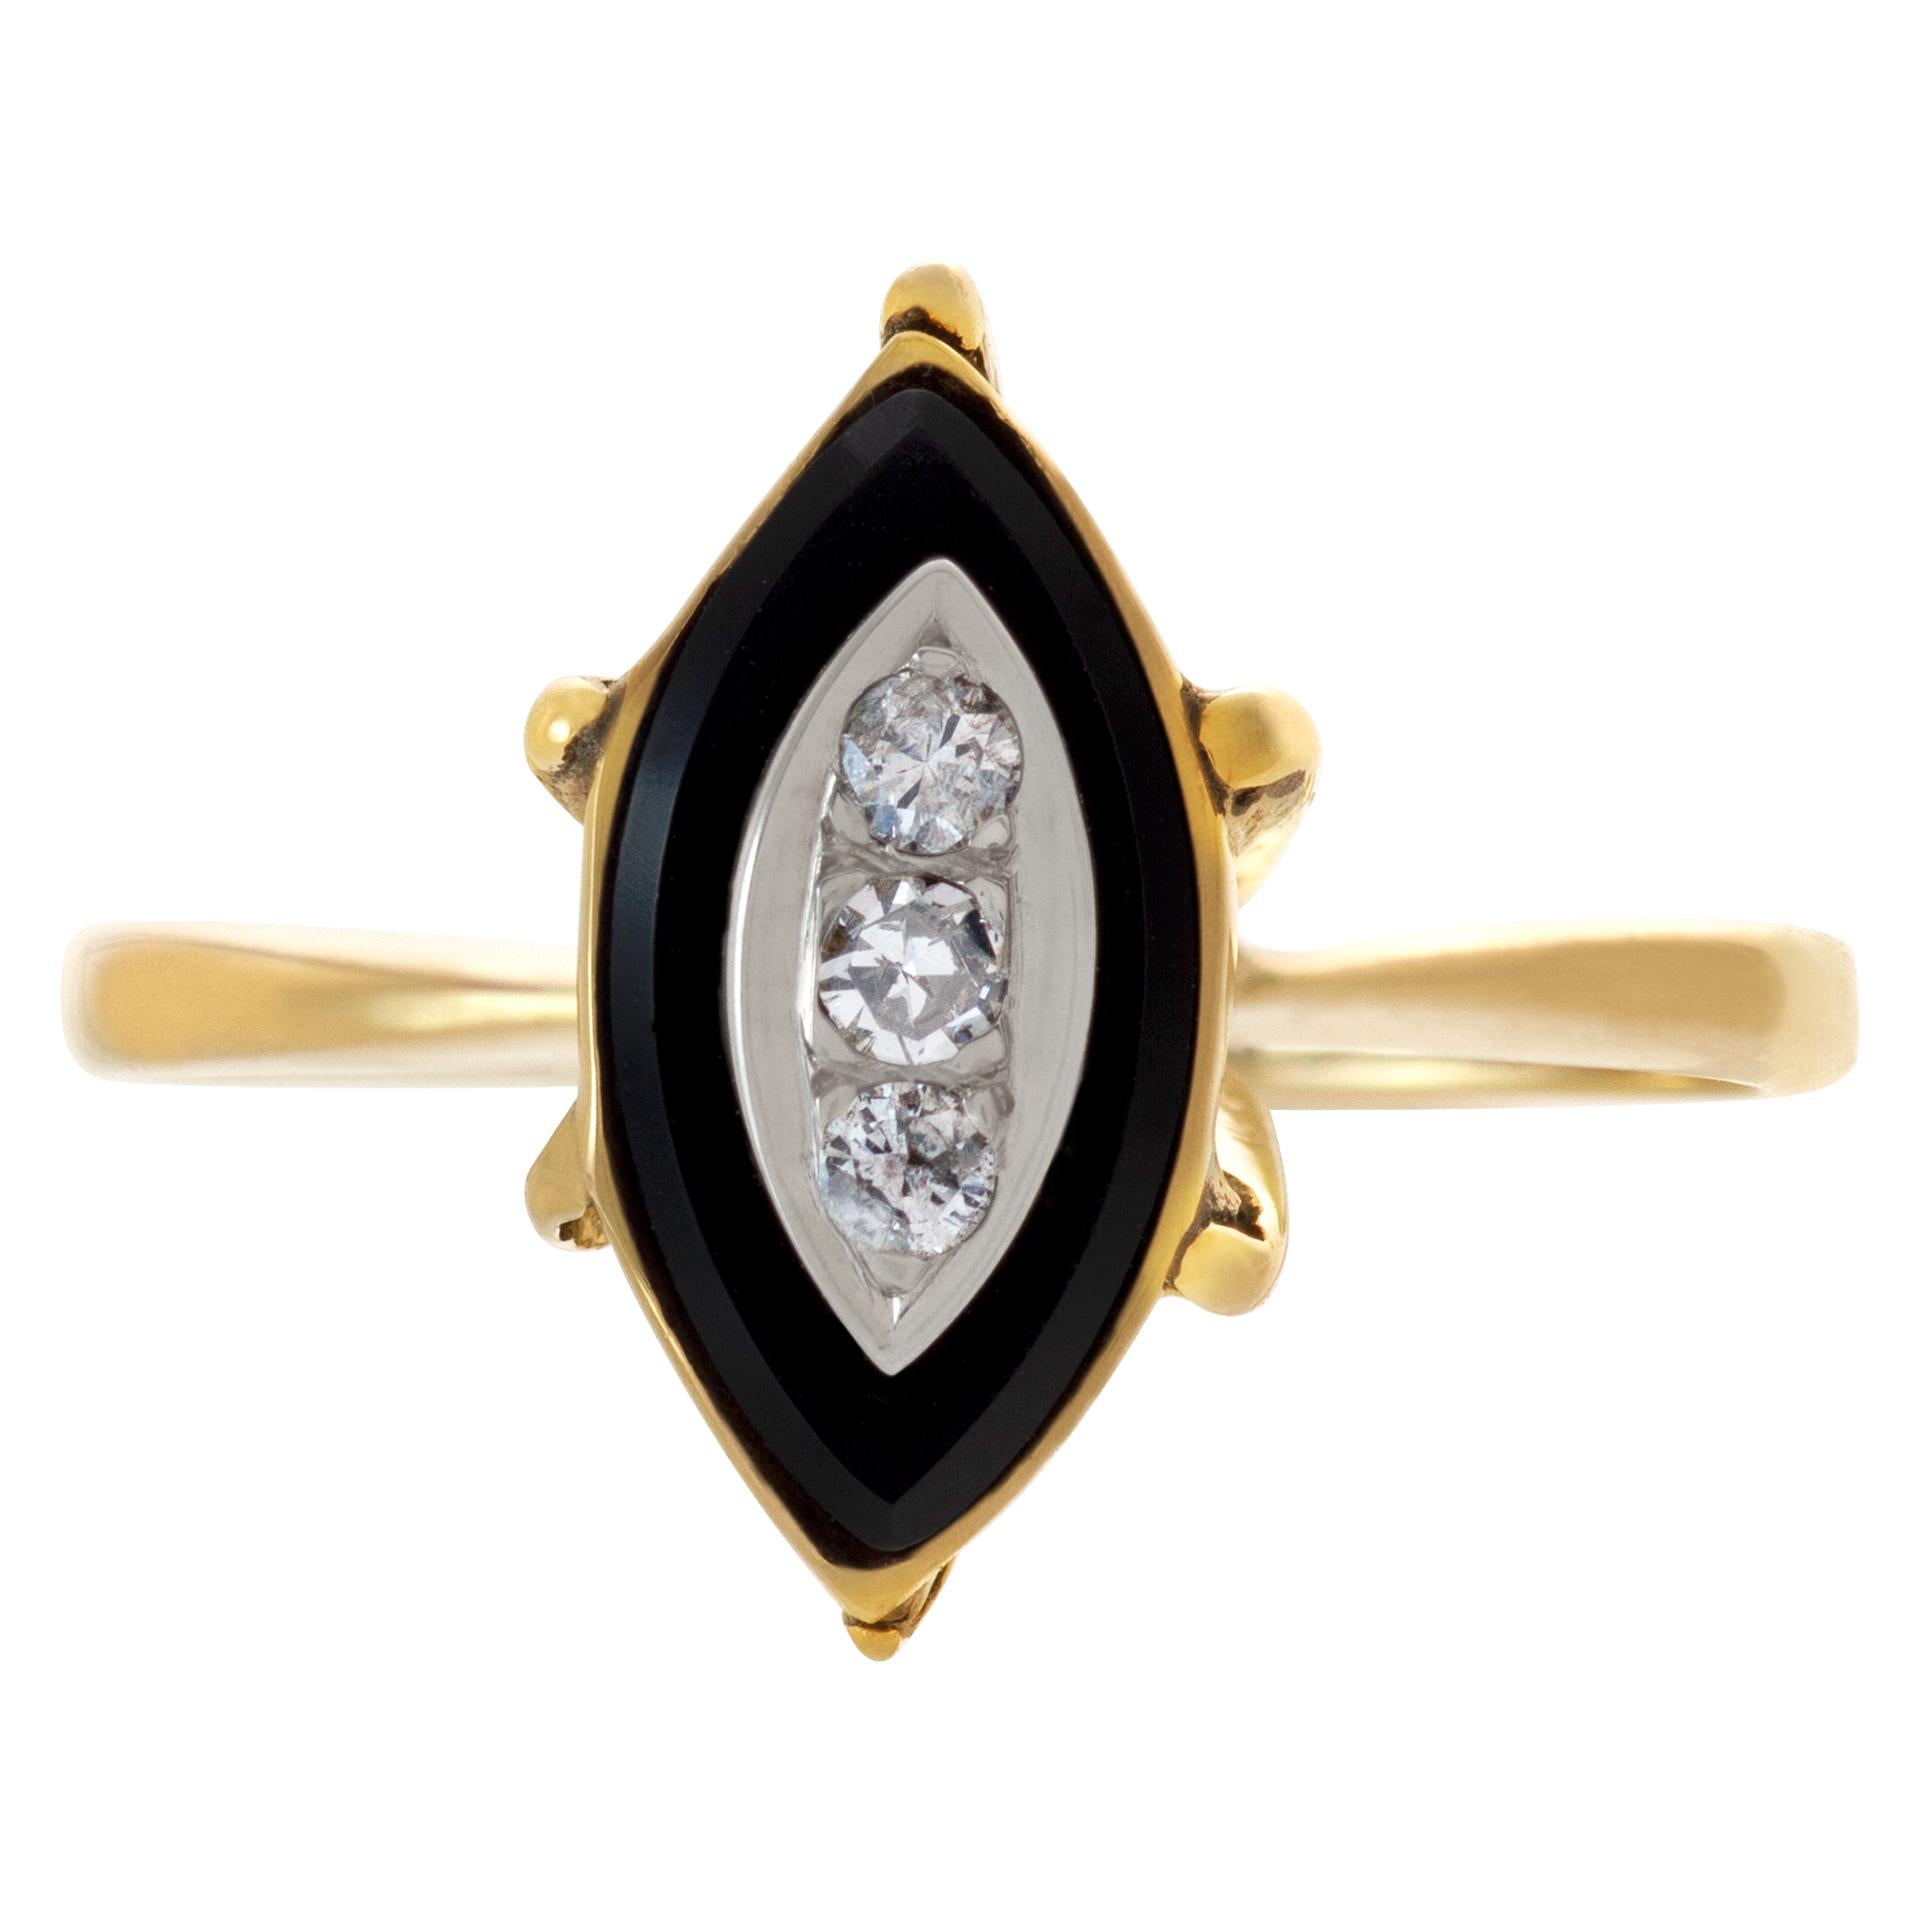 Vintage diamond and onyx ring in 14k yellow gold. Ring size: 7.5.

This Diamond ring is currently size 7.5 and some items can be sized up or down, please ask! It weighs 2.3 pennyweights and is 14k.